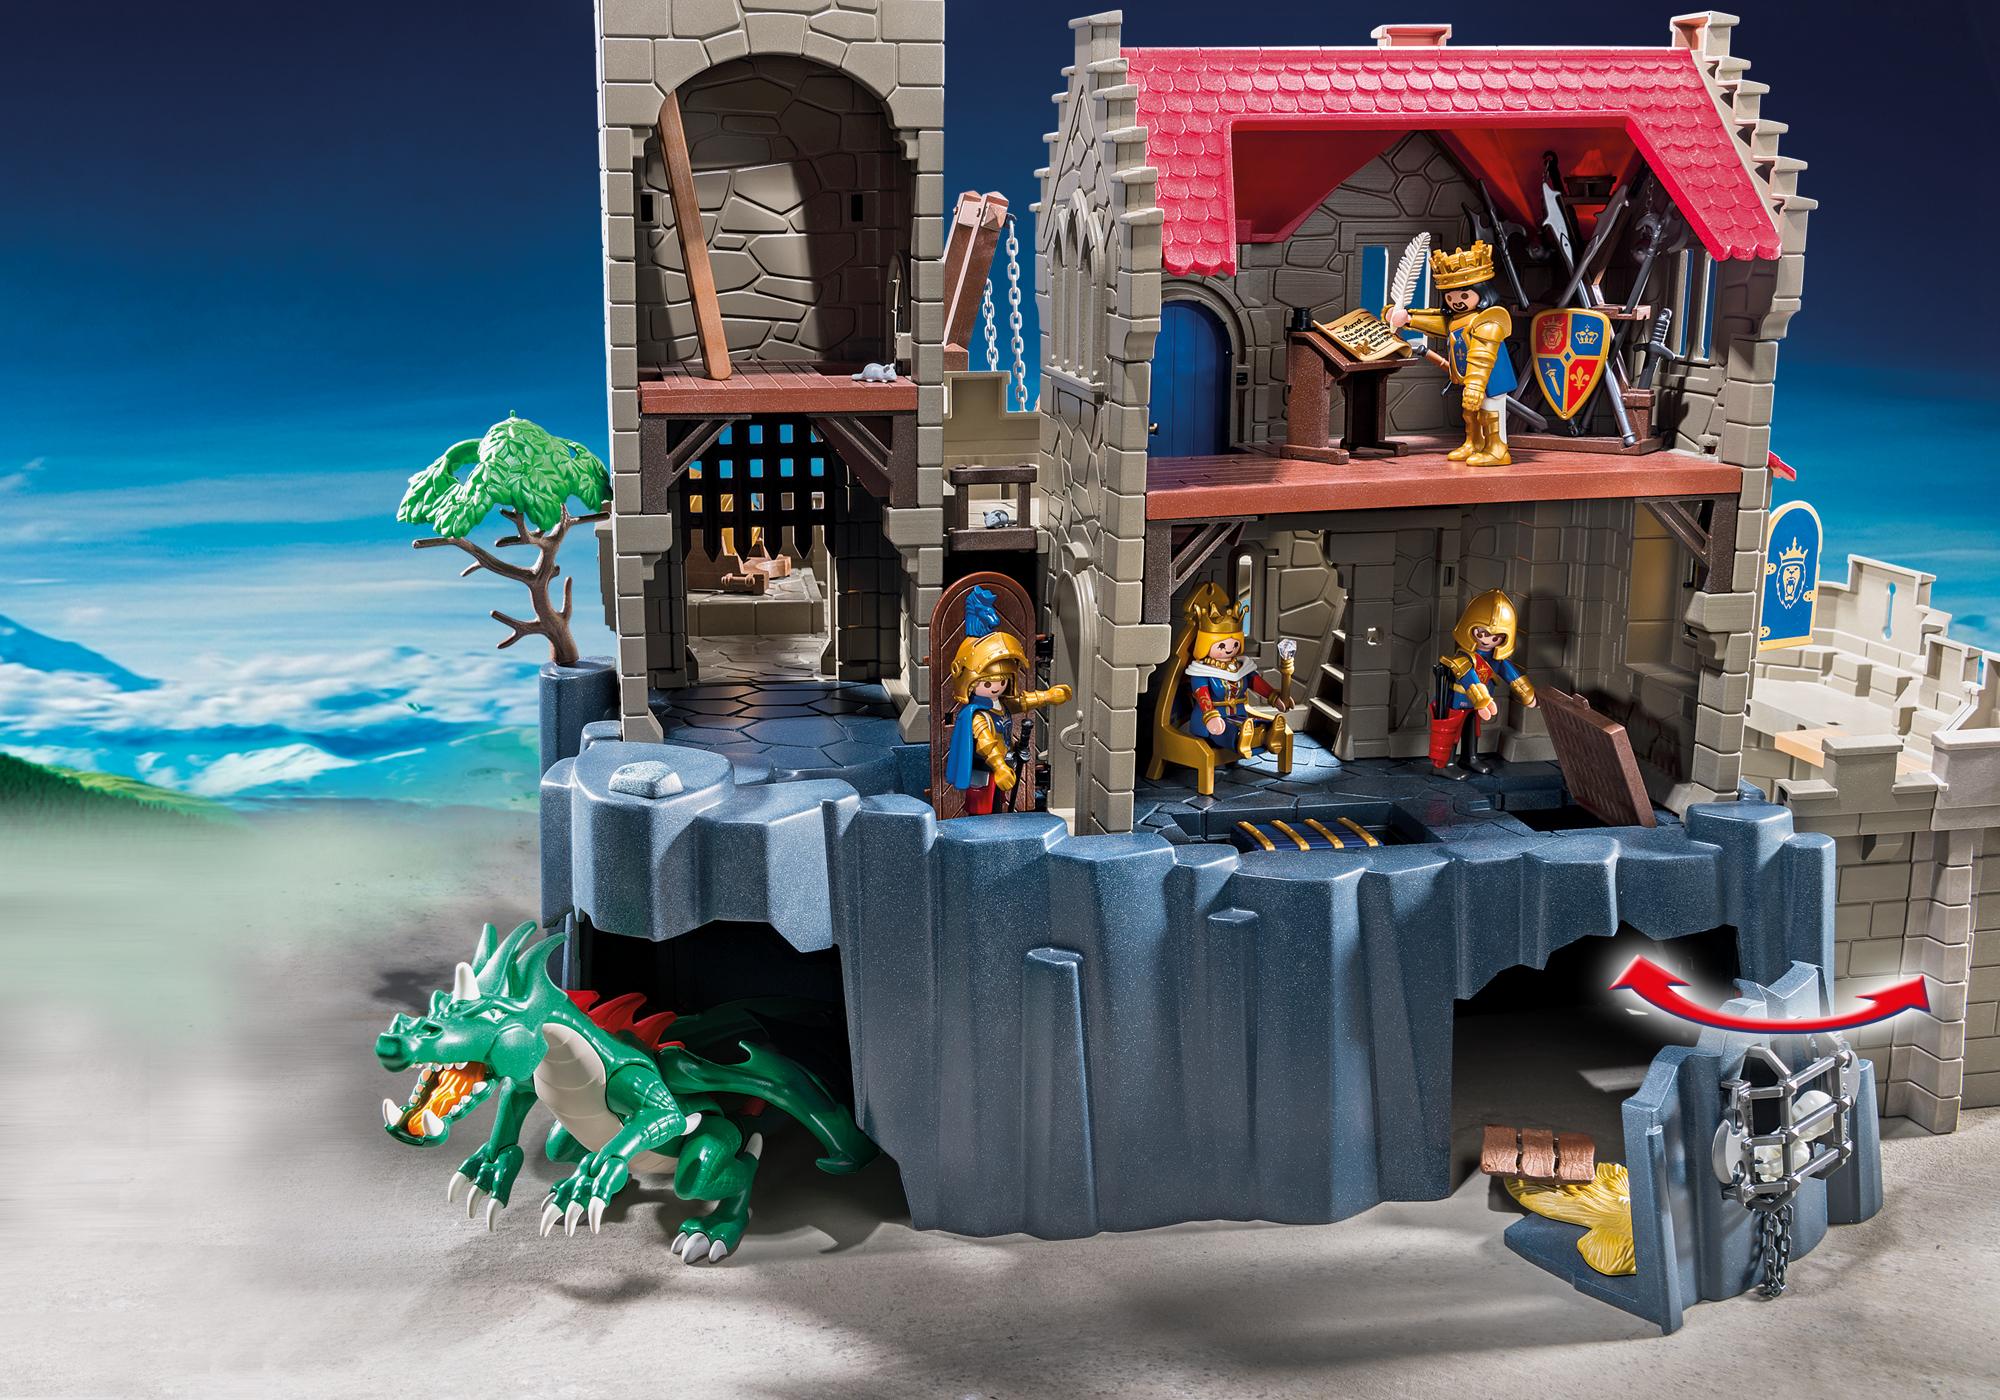 playmobil knights castle 6000